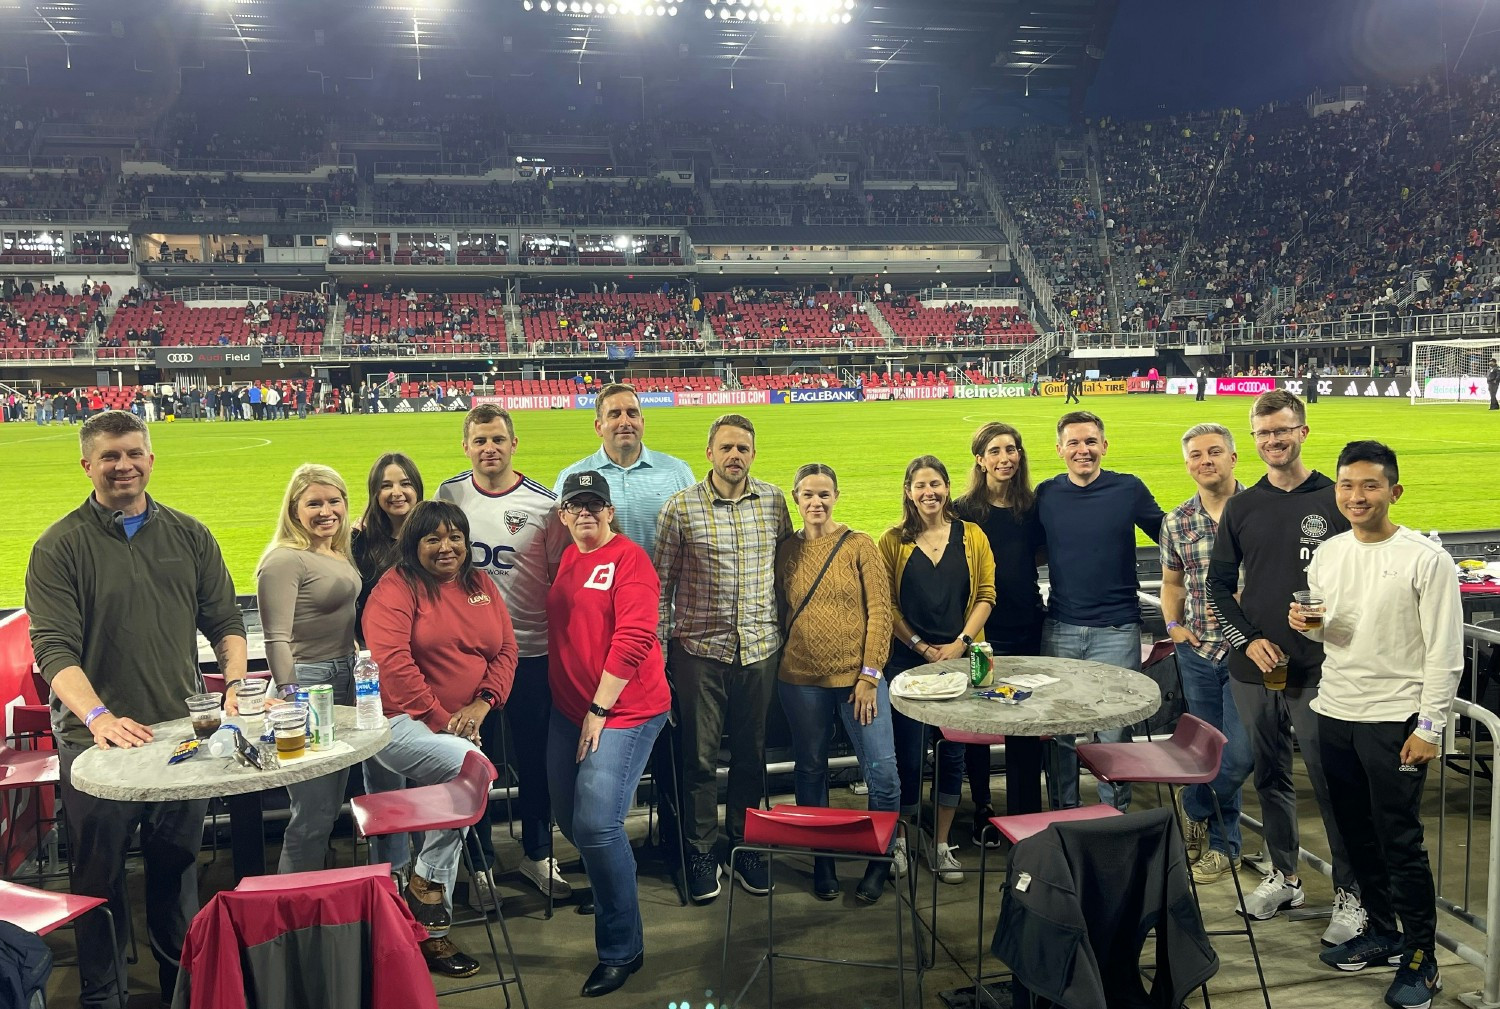 The Forge Team cheers on the DC United Soccer Team. We believe nothing's better than a team that cheers for one another.